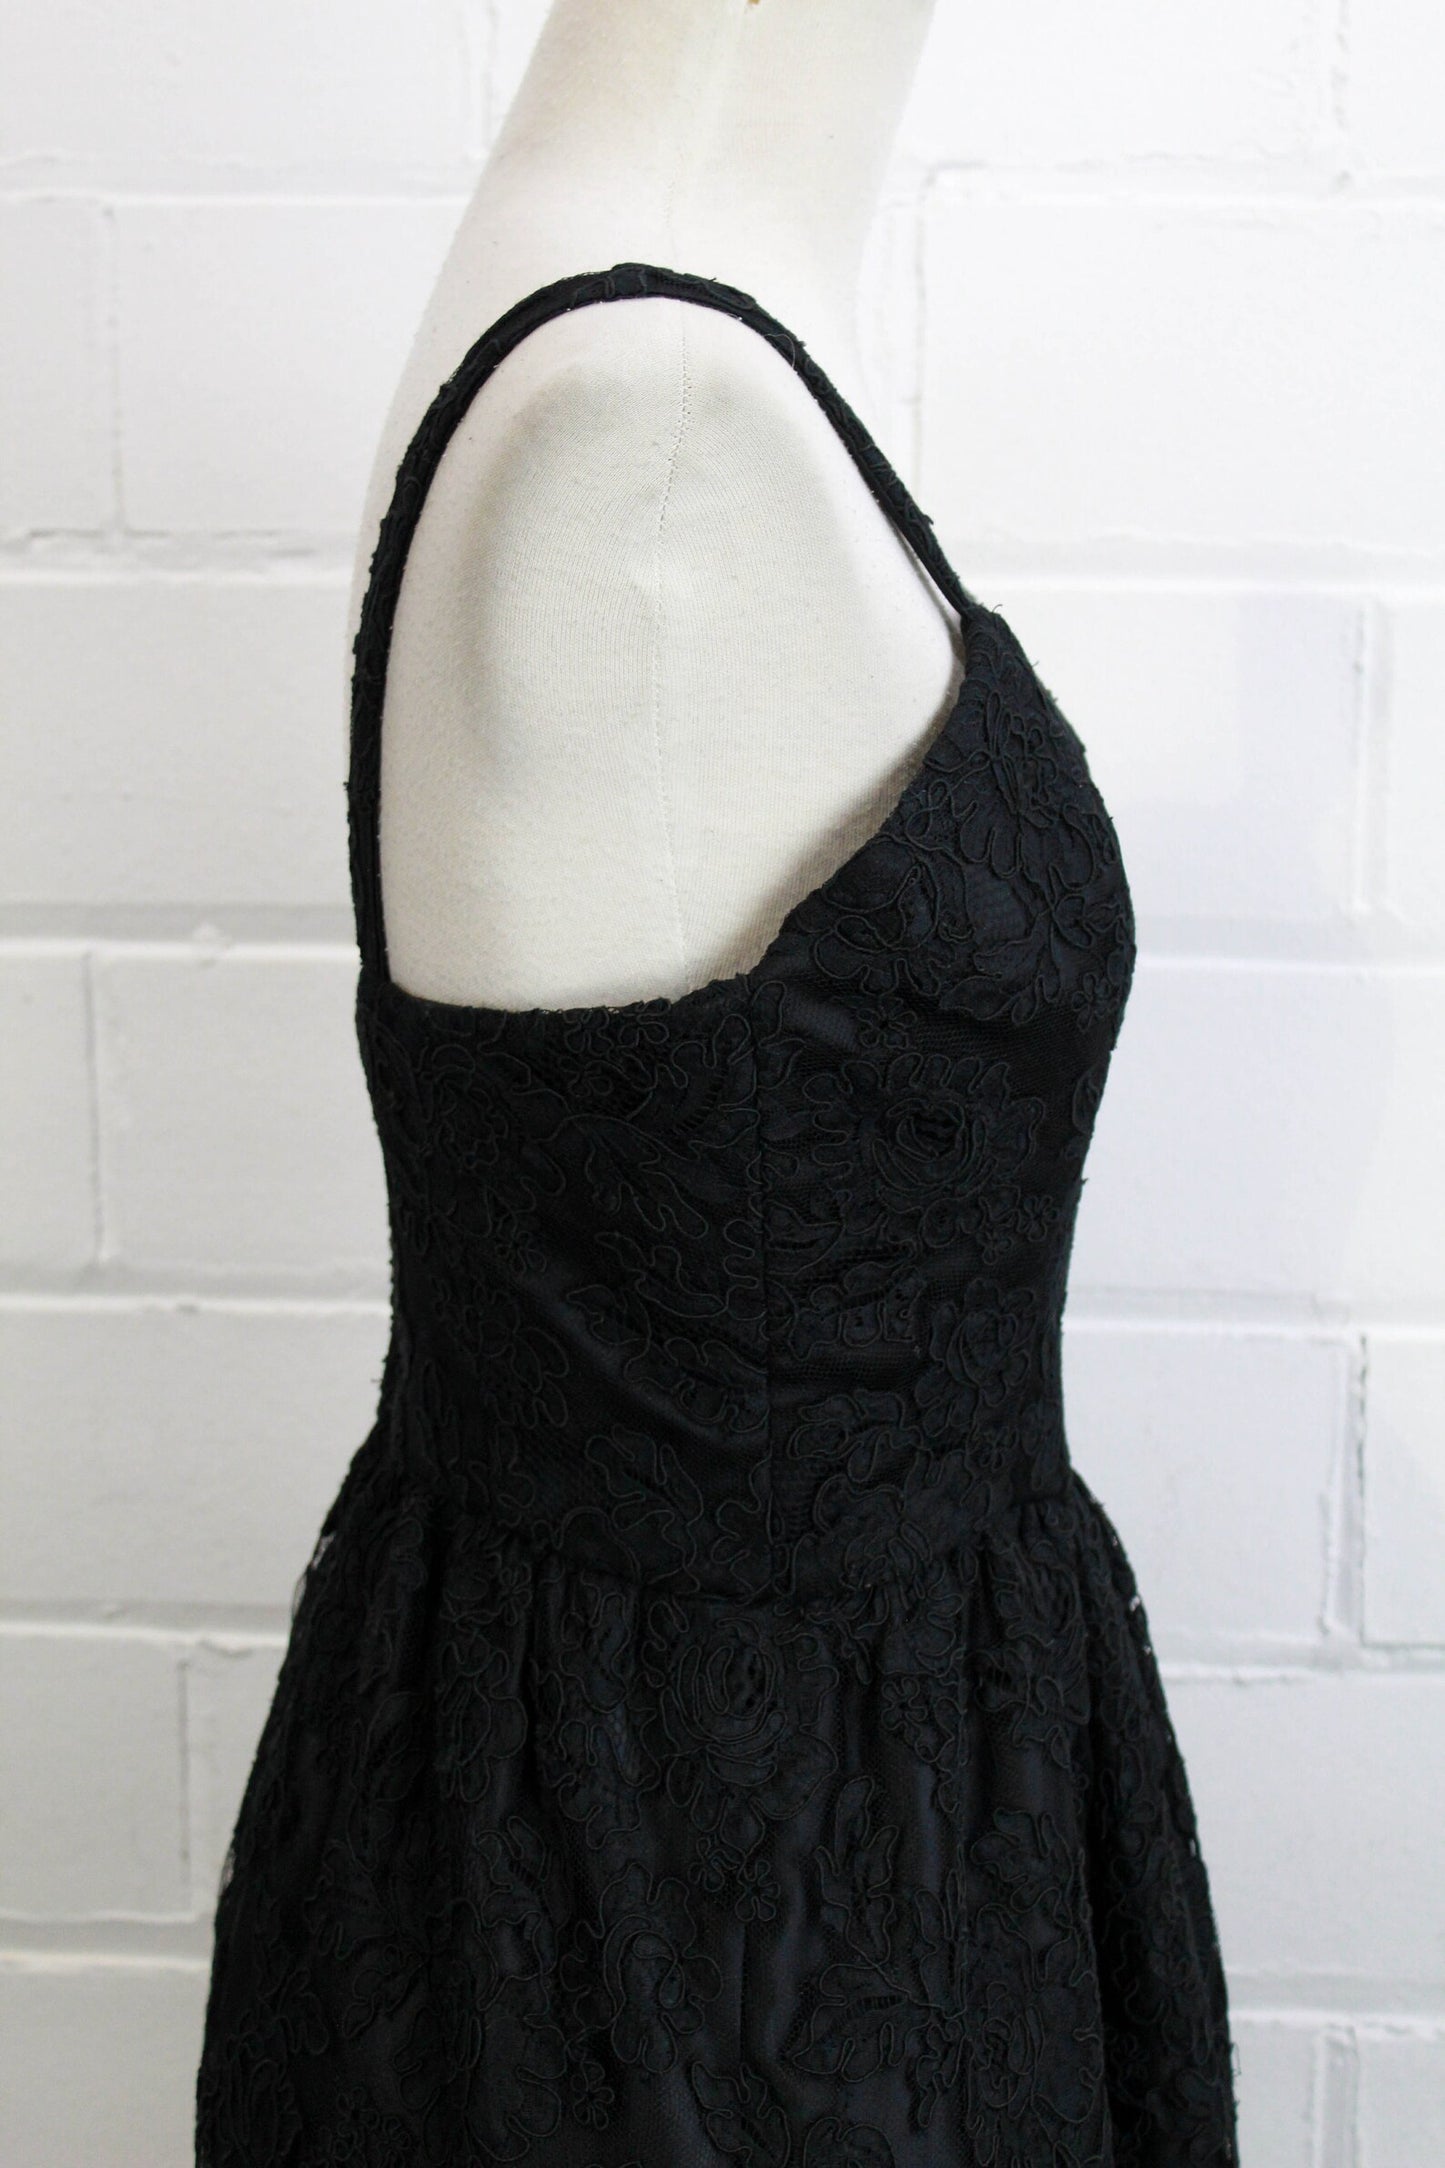 80s Black Lace Cocktail Dress by Catherine Regehr, Small, Vintage Party Dress with Crinoline